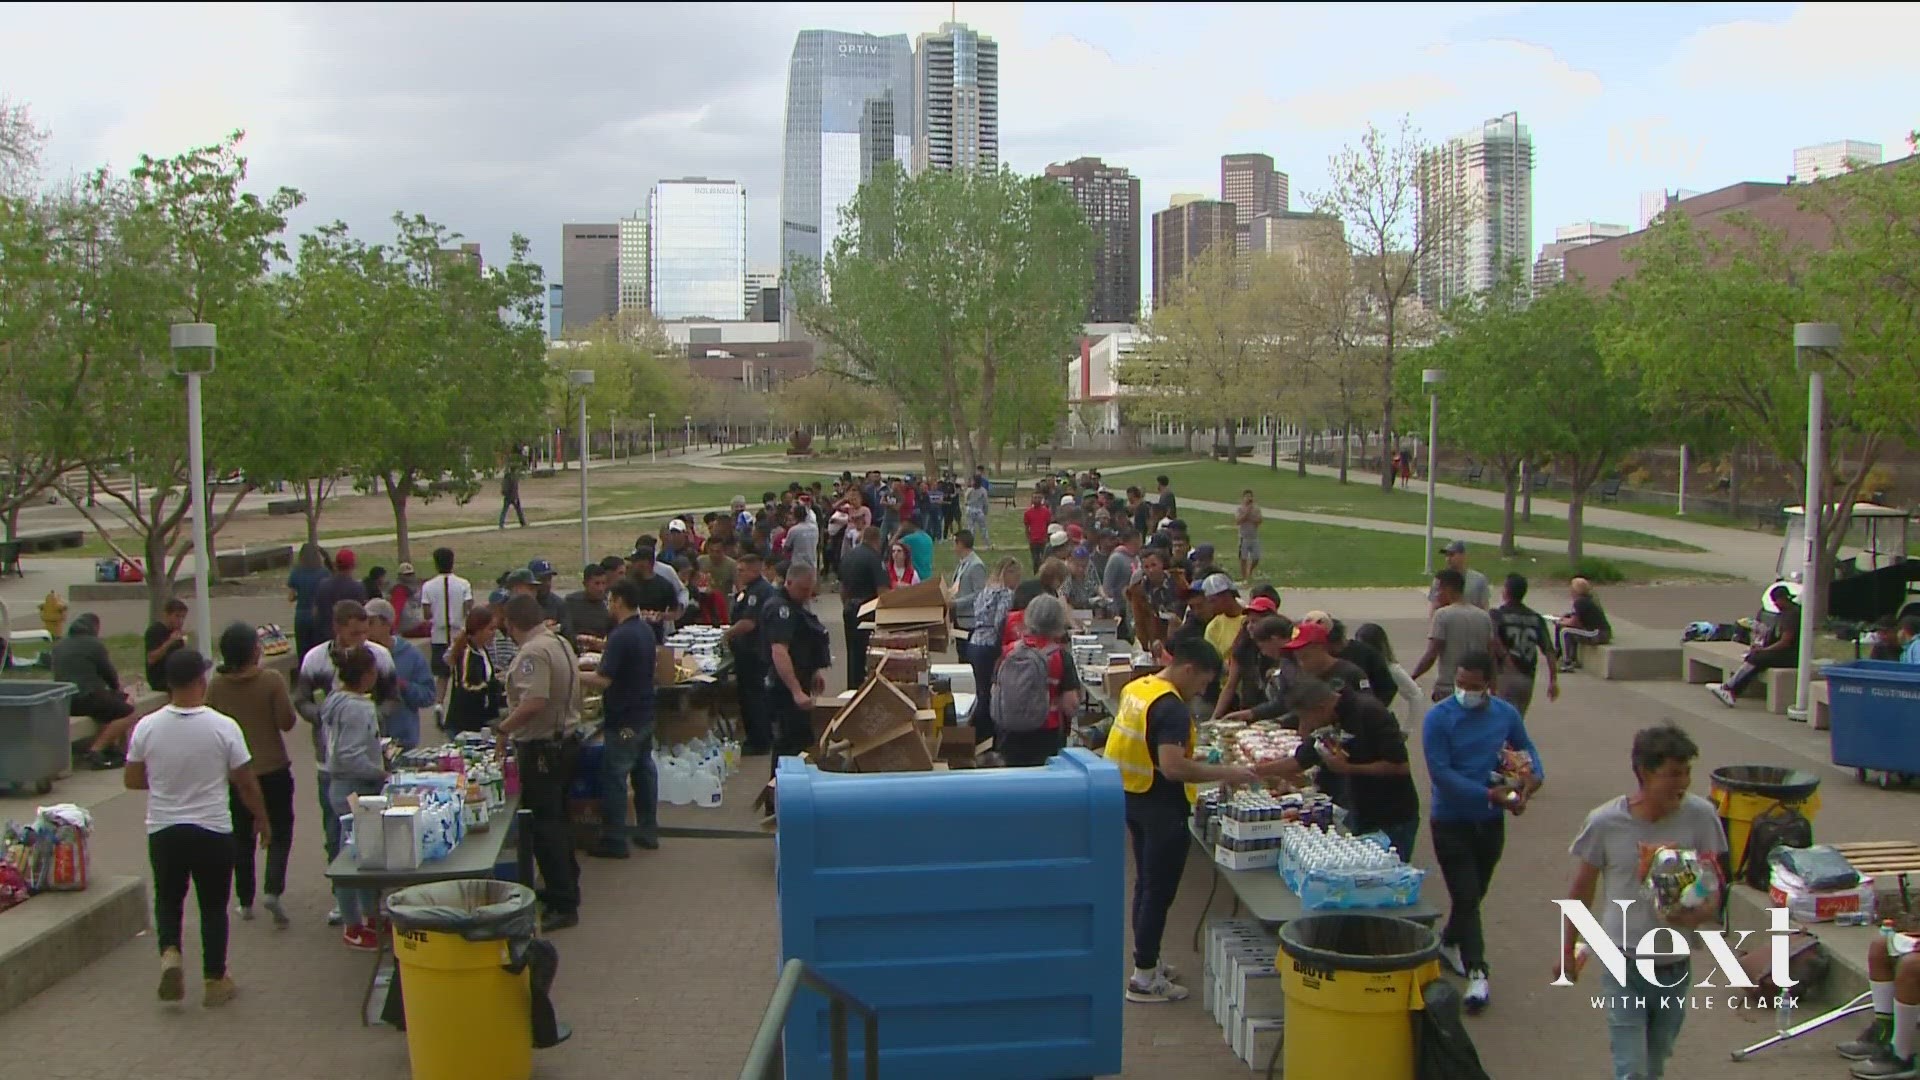 The city is in the process of choosing several vendors to outsource everything from shelter to medical services for migrants arriving in Colorado.